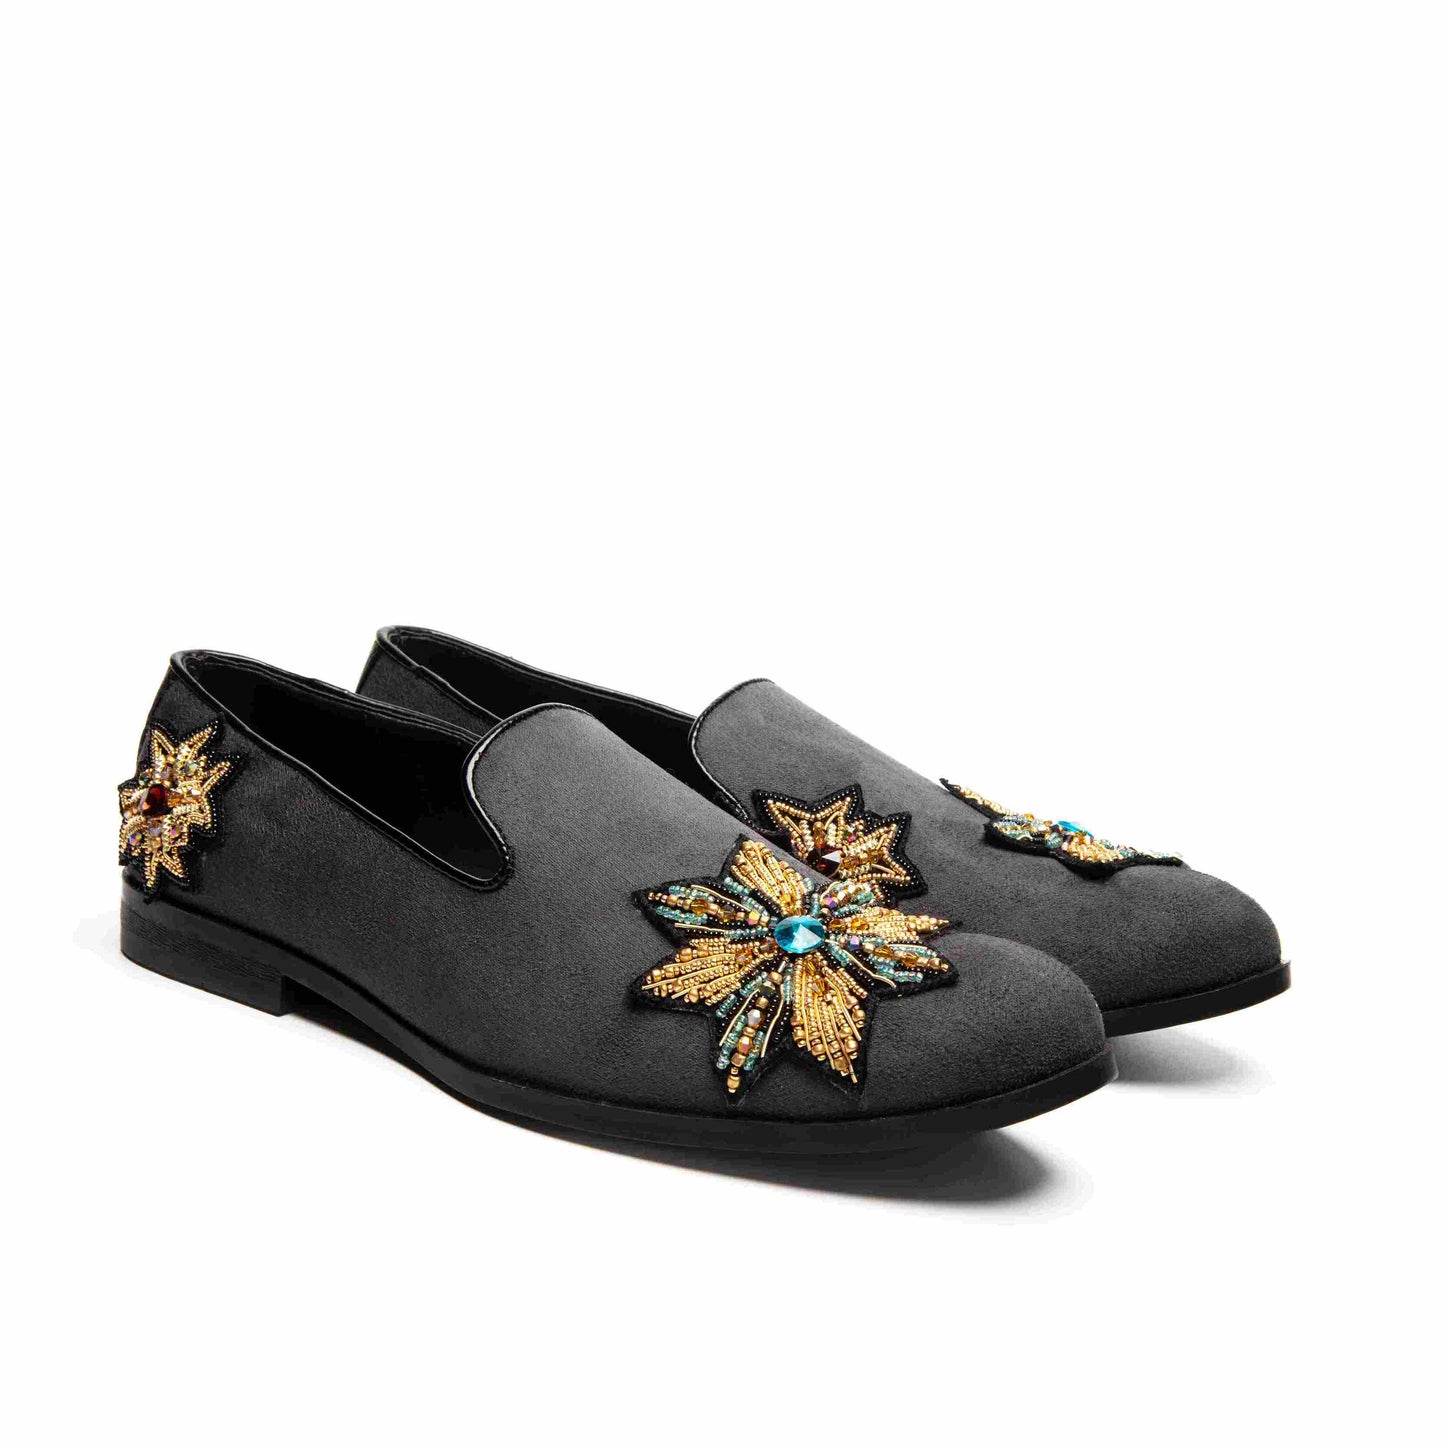 Grey Suede & Leather Embroidered Moccasin Shoes